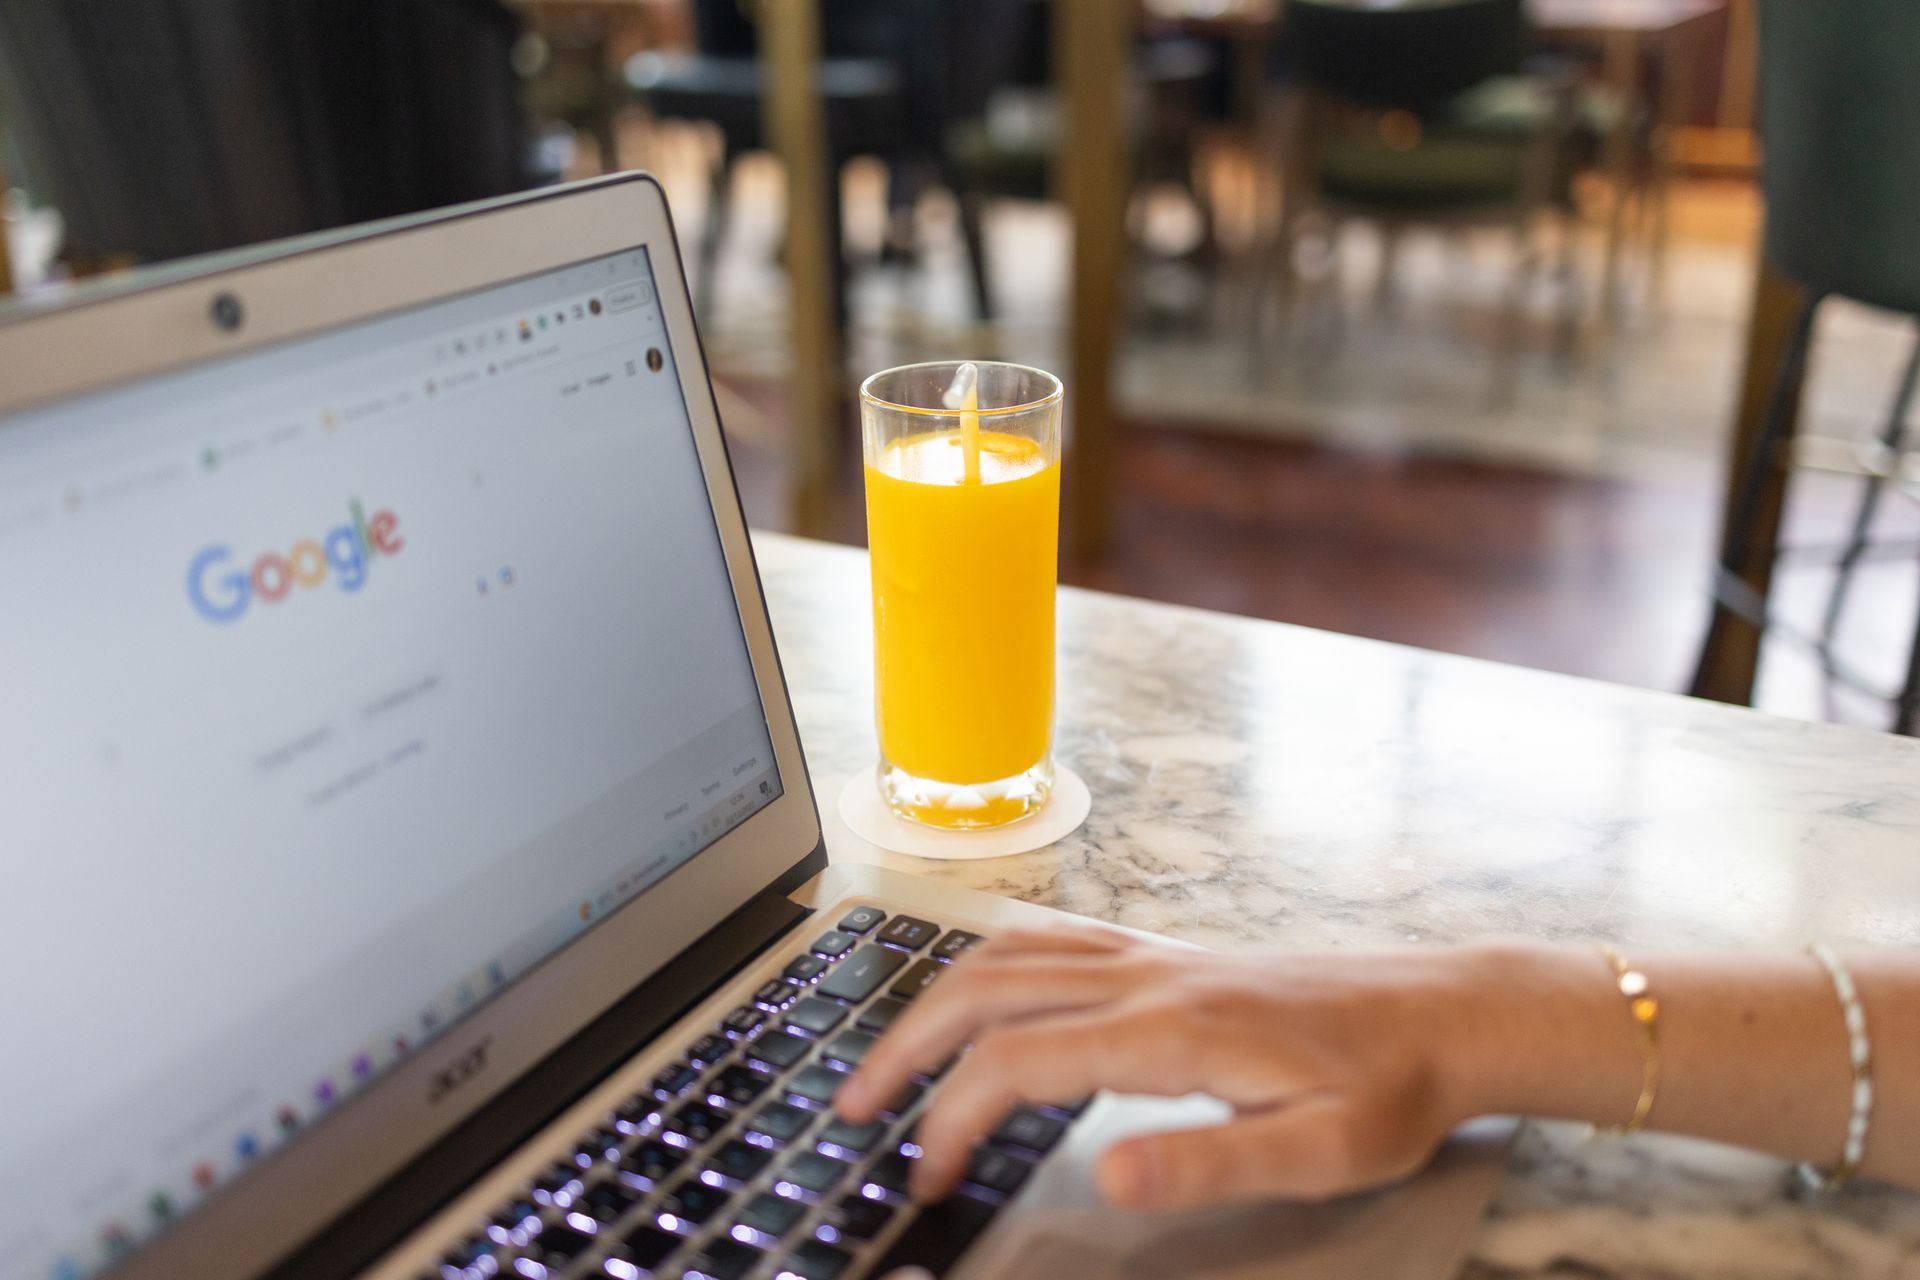 A person is typing on a laptop next to a glass of orange juice.